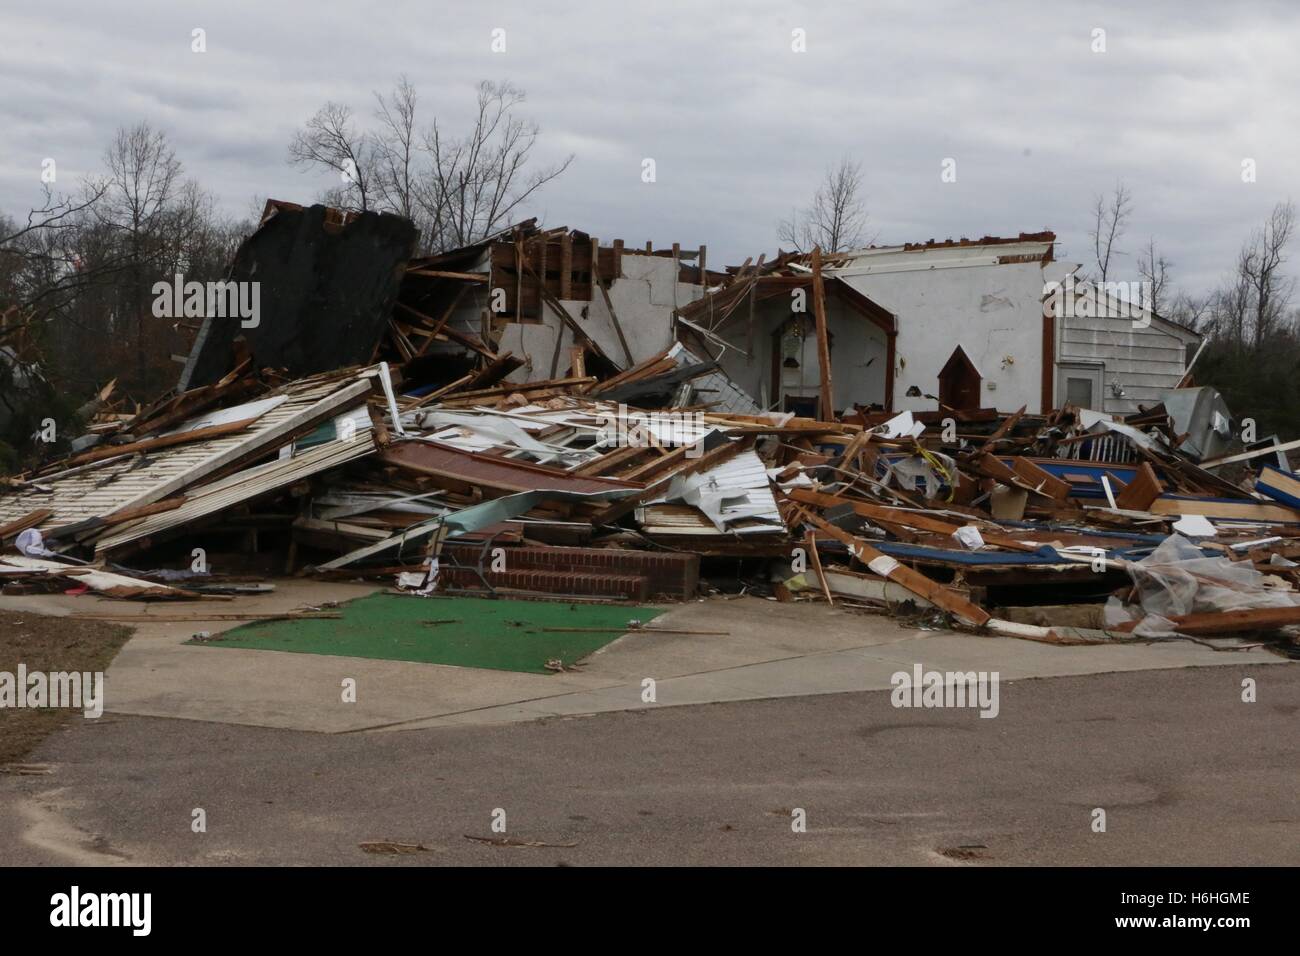 Debris from a destroyed house blocks a road after a severe storm and tornado February 25, 2016 in Essex County, Virginia. Stock Photo